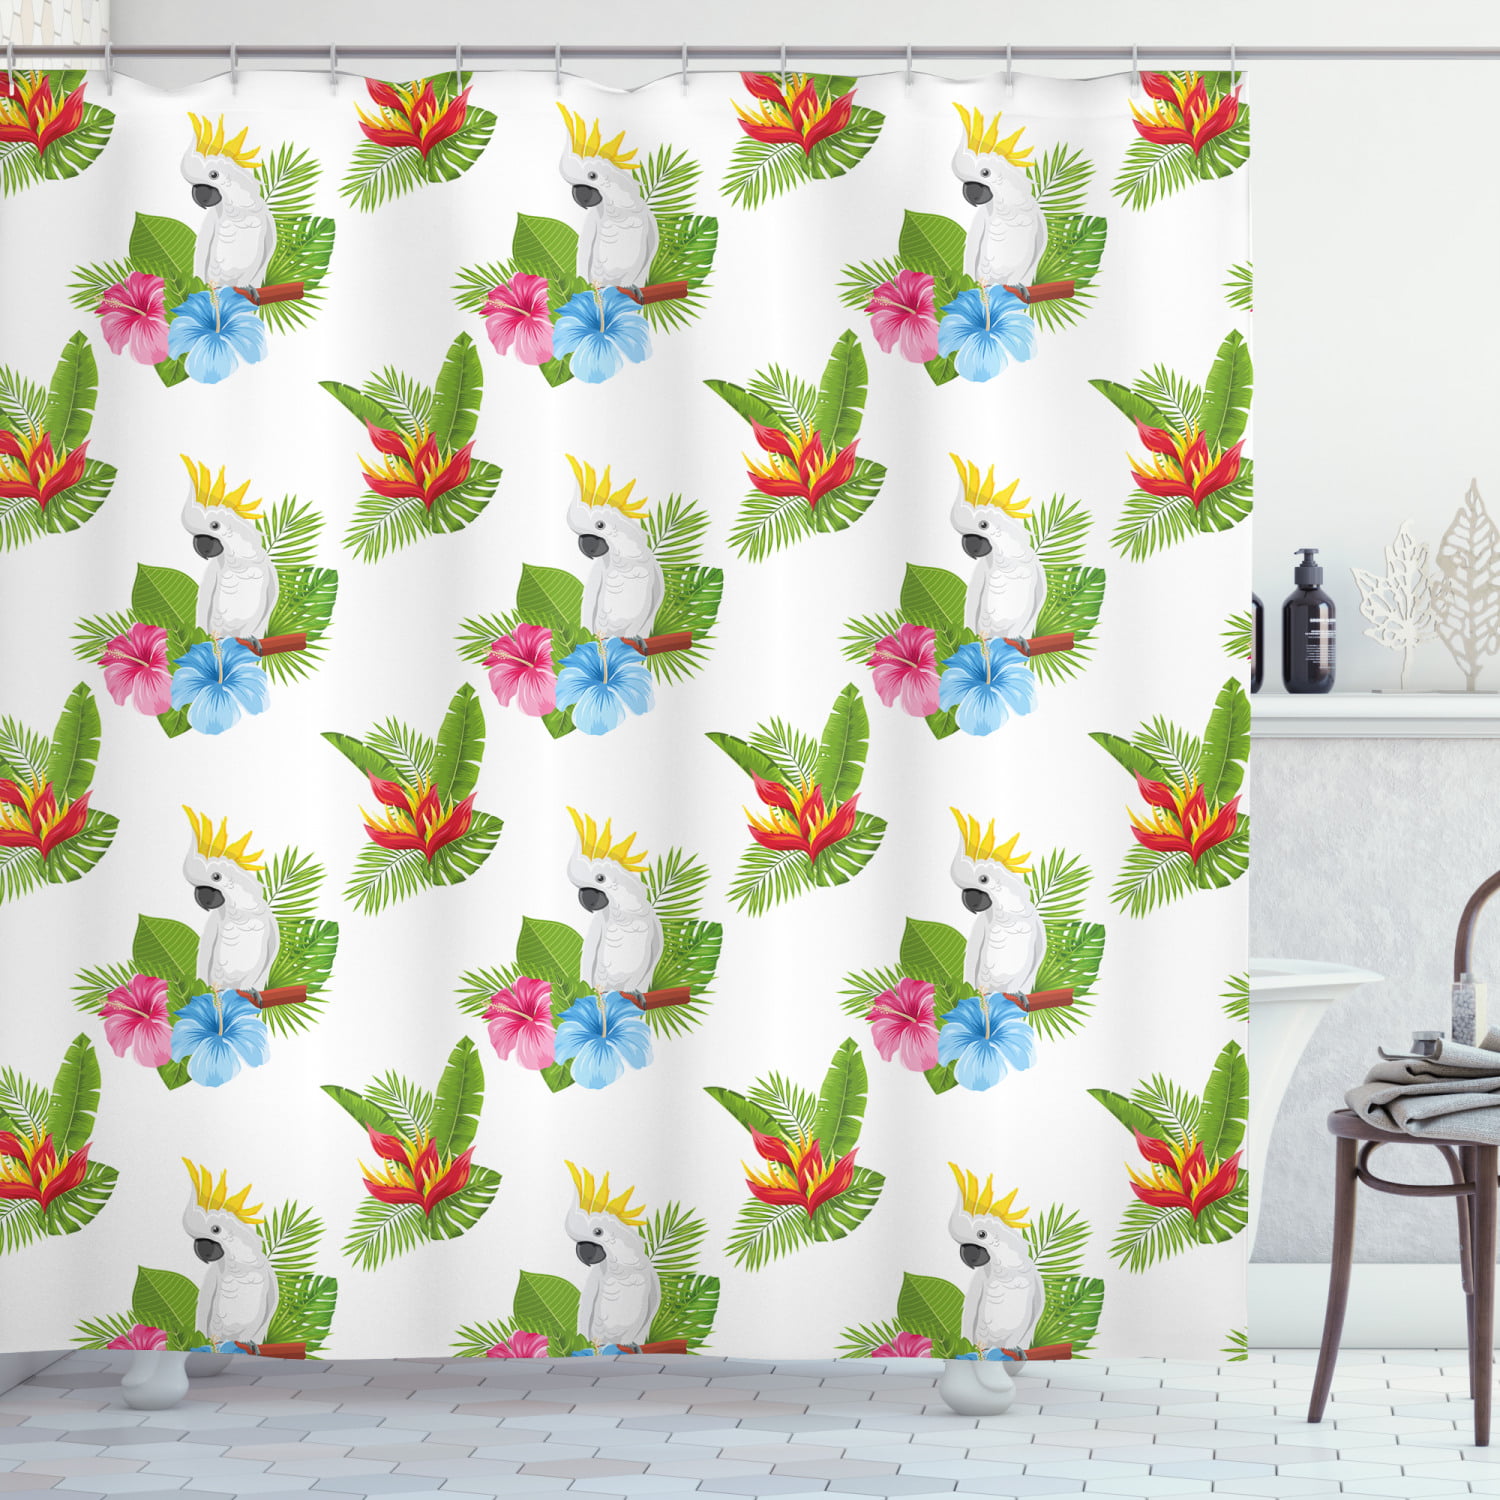 Details about   Hibiscus Flowers Cockatoo Tropical Decor Wildlife Pattern Shower Curtain Set 